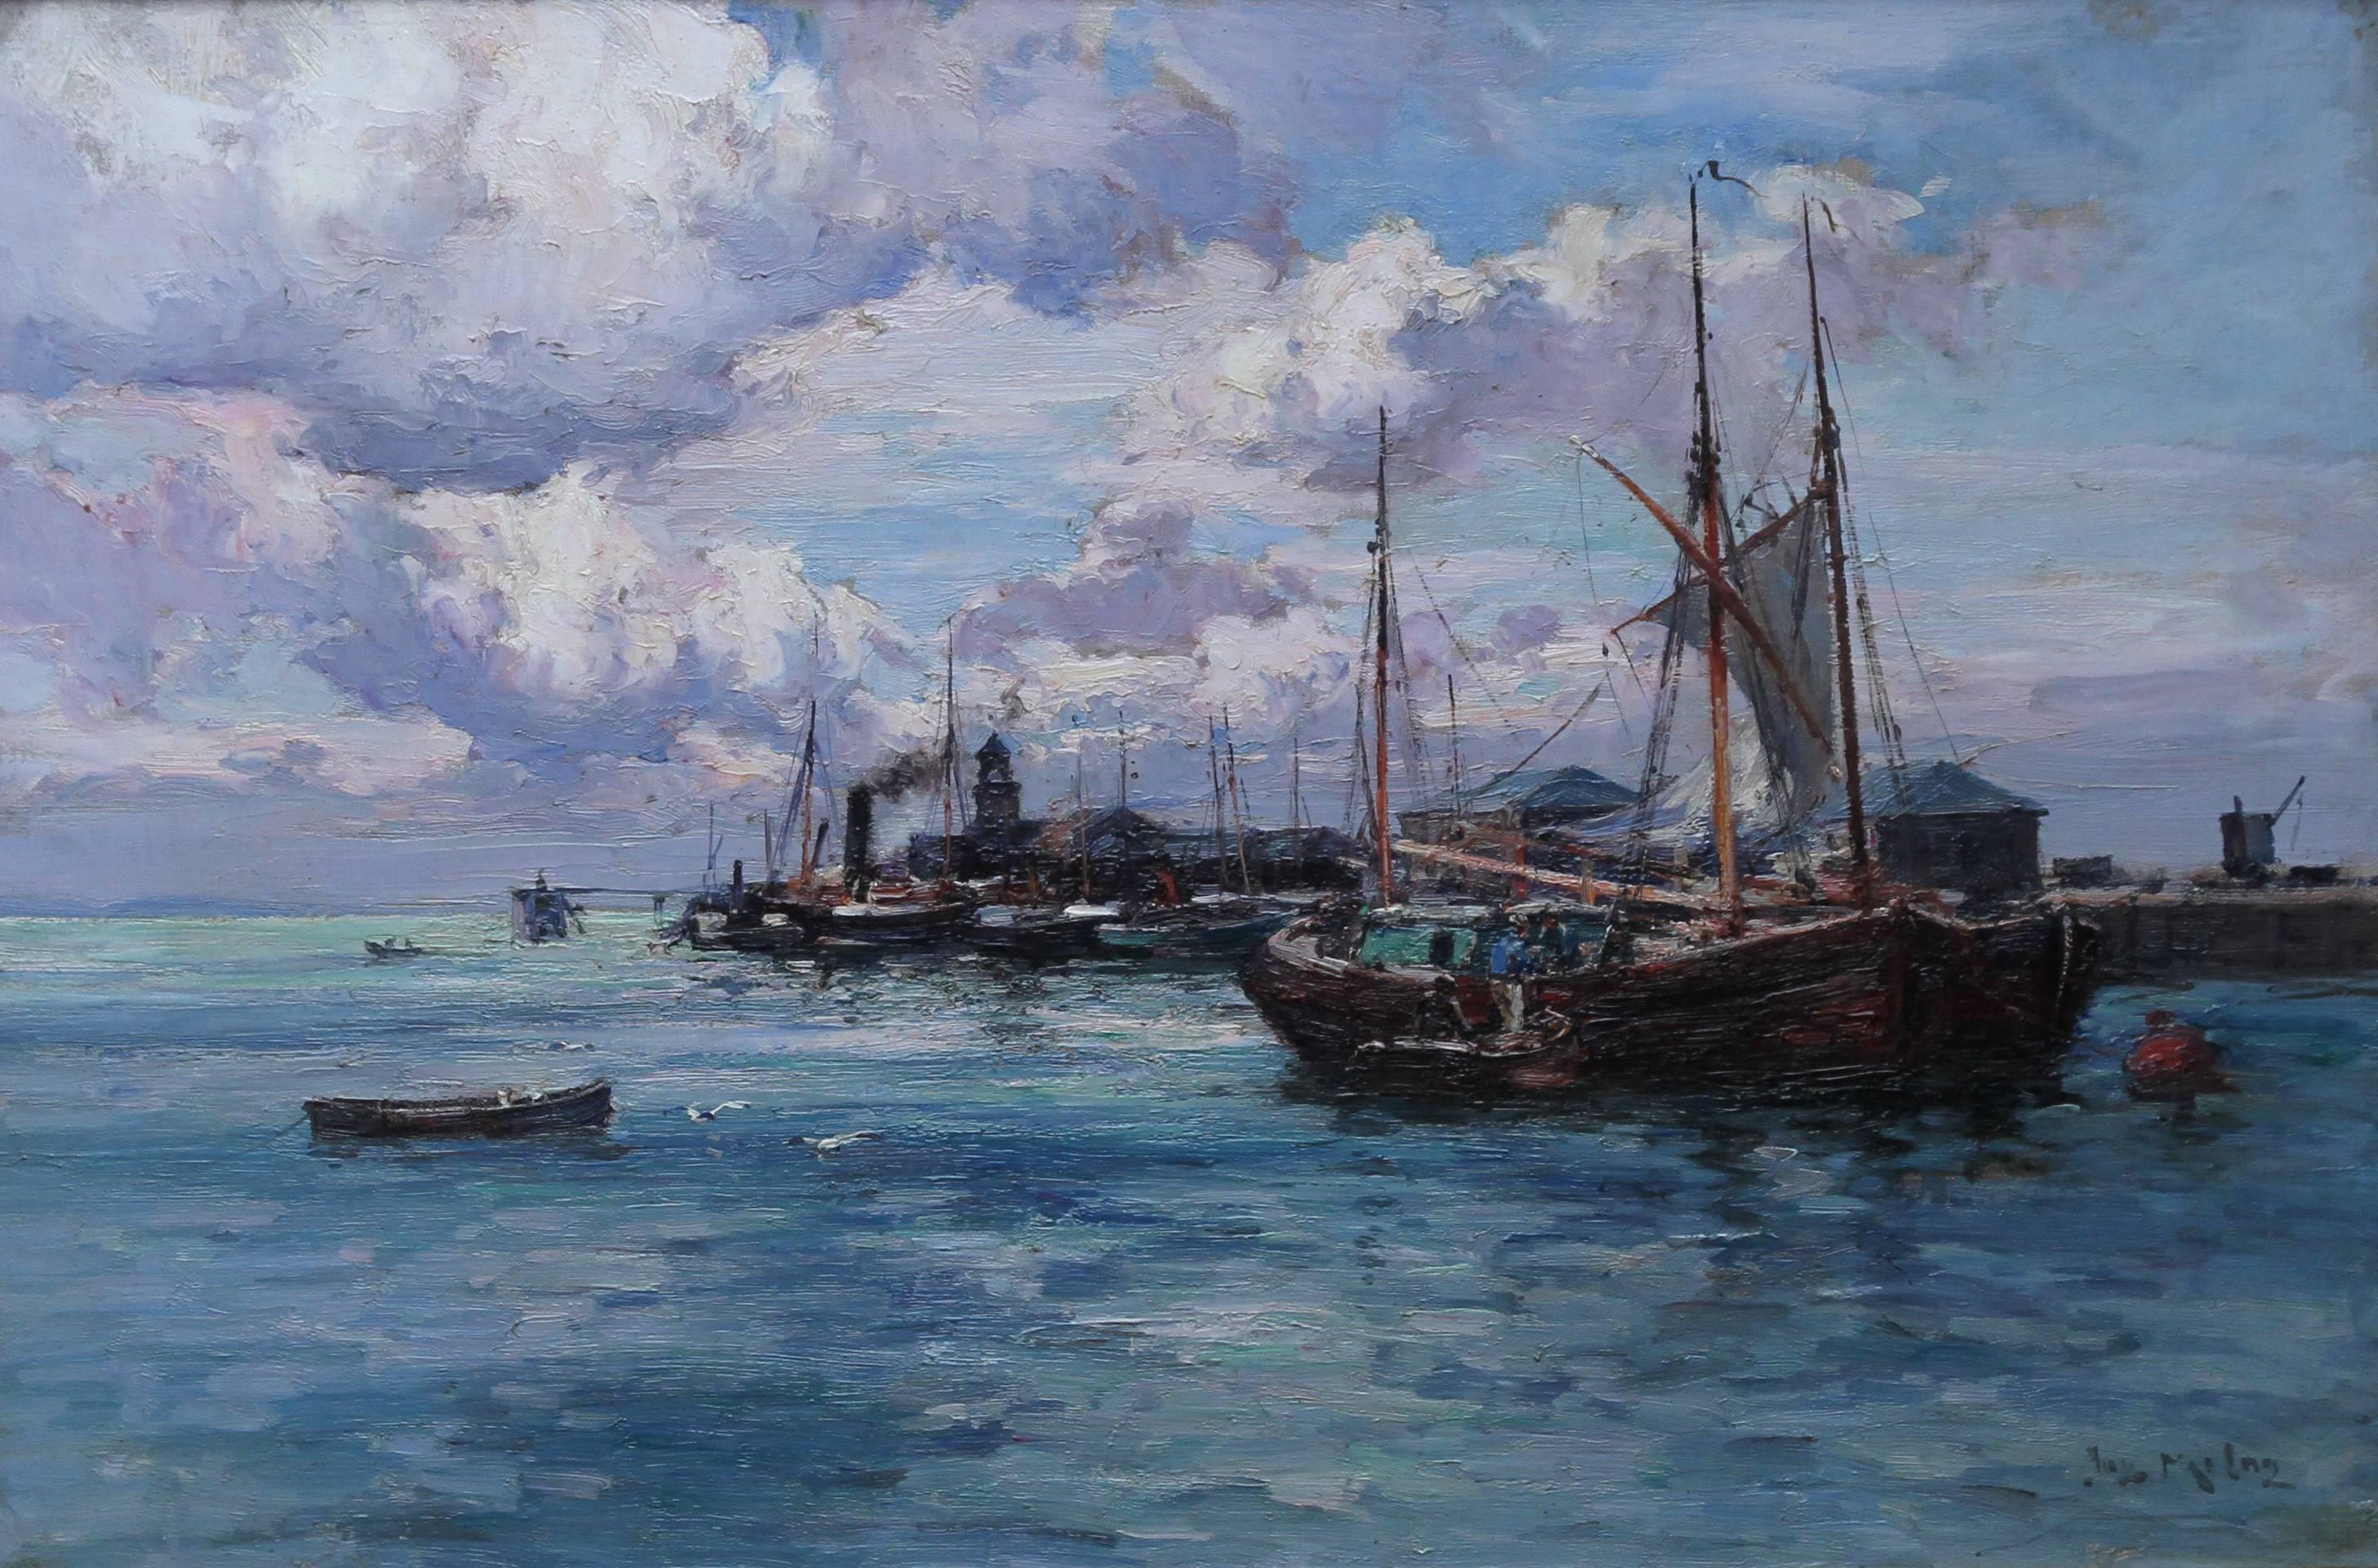 Boats at Harbour - Scottish art Victorian Impressionist oil painting seascape - Painting by Joseph Milne